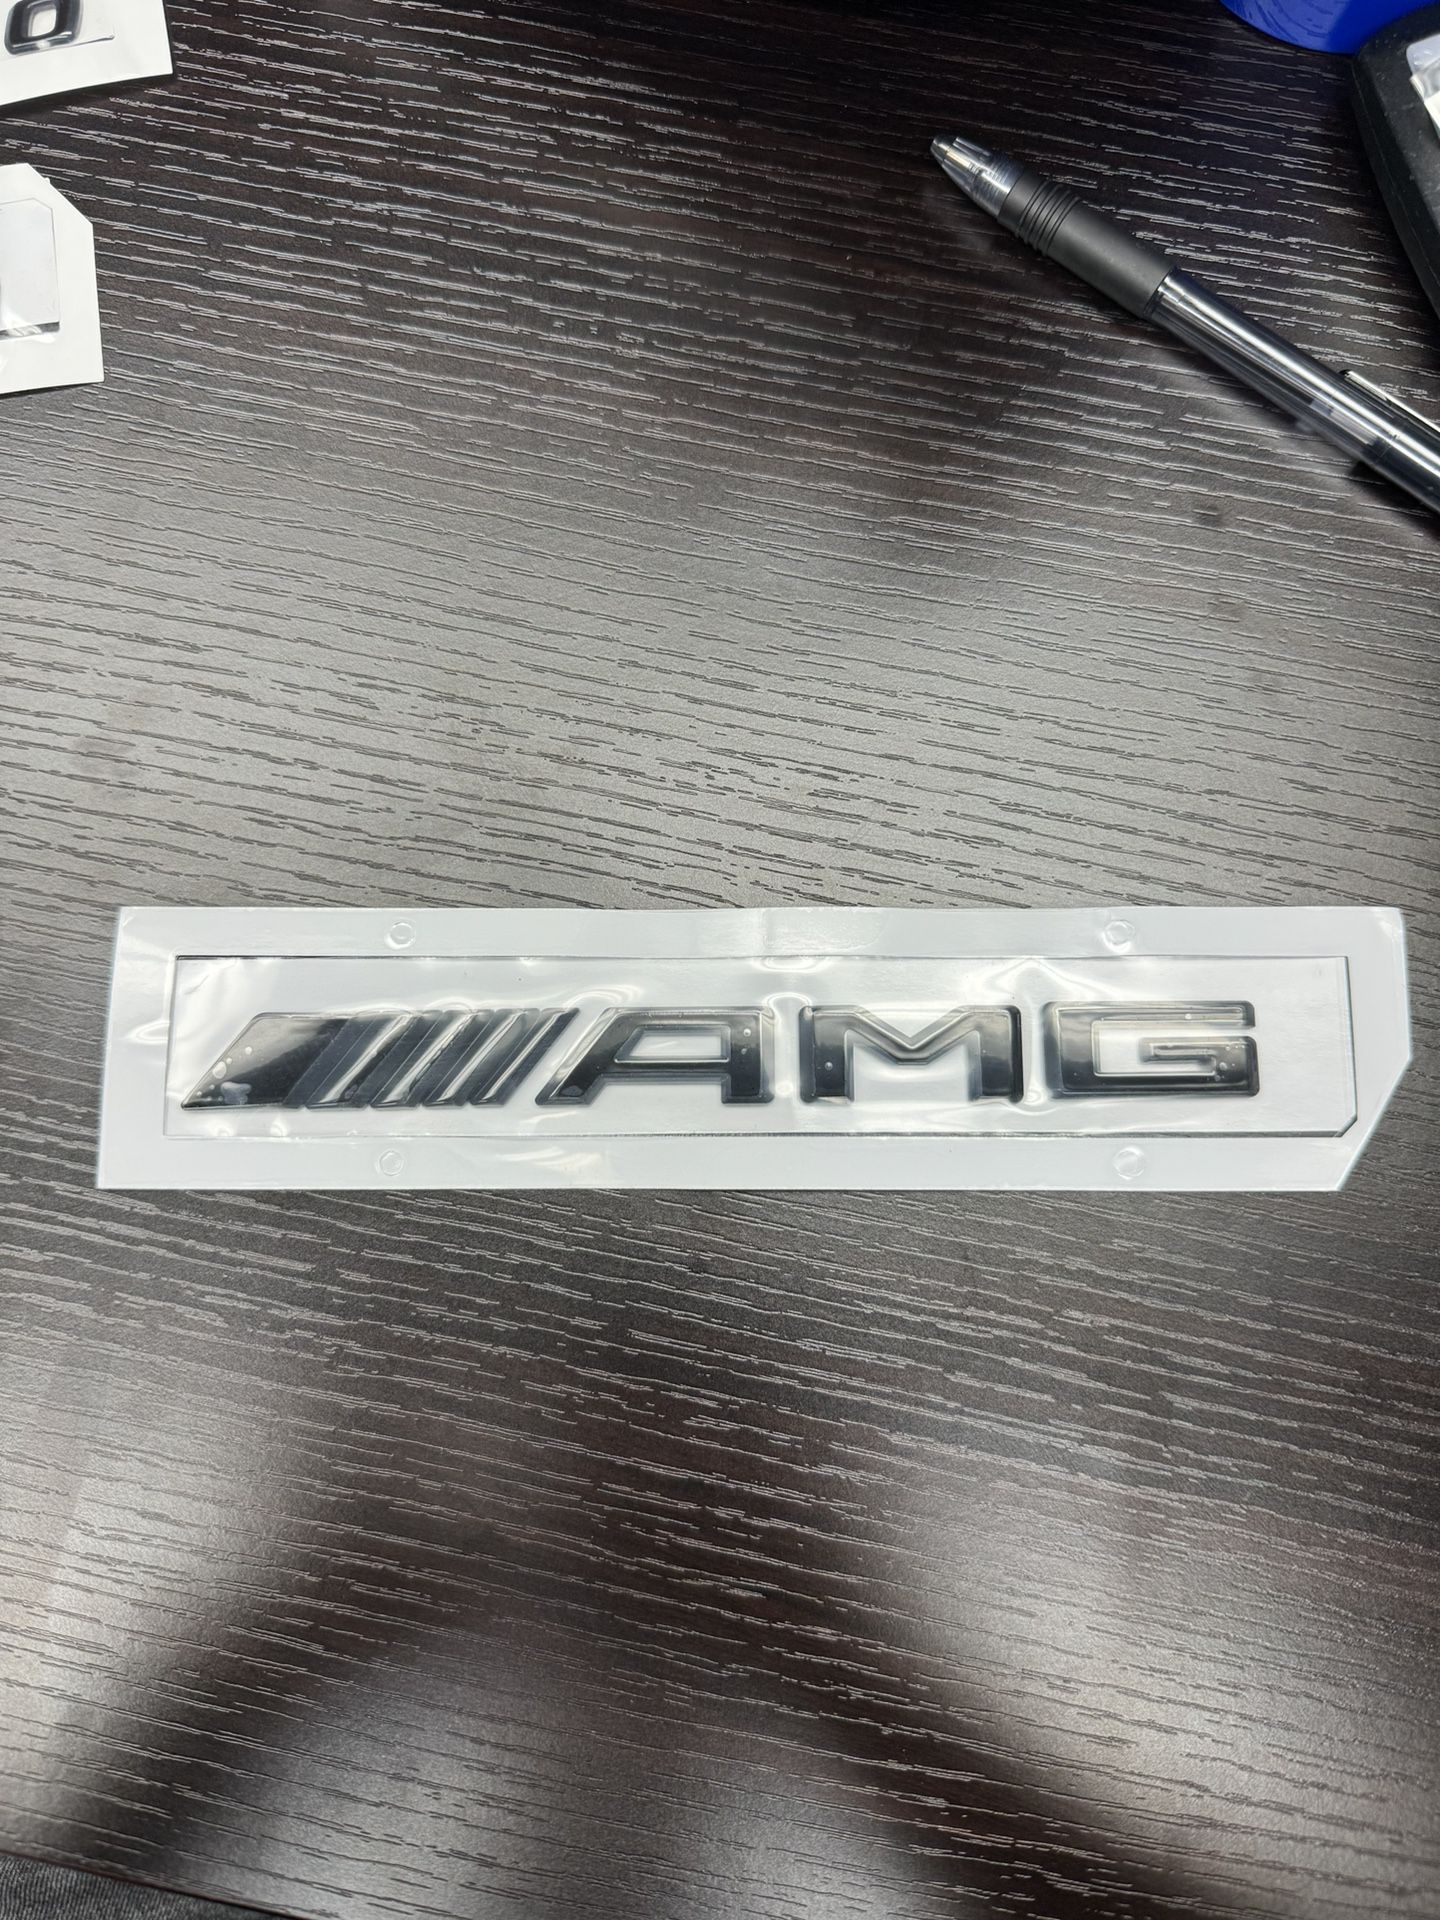 Mercedes AMG Badge Blacked Out